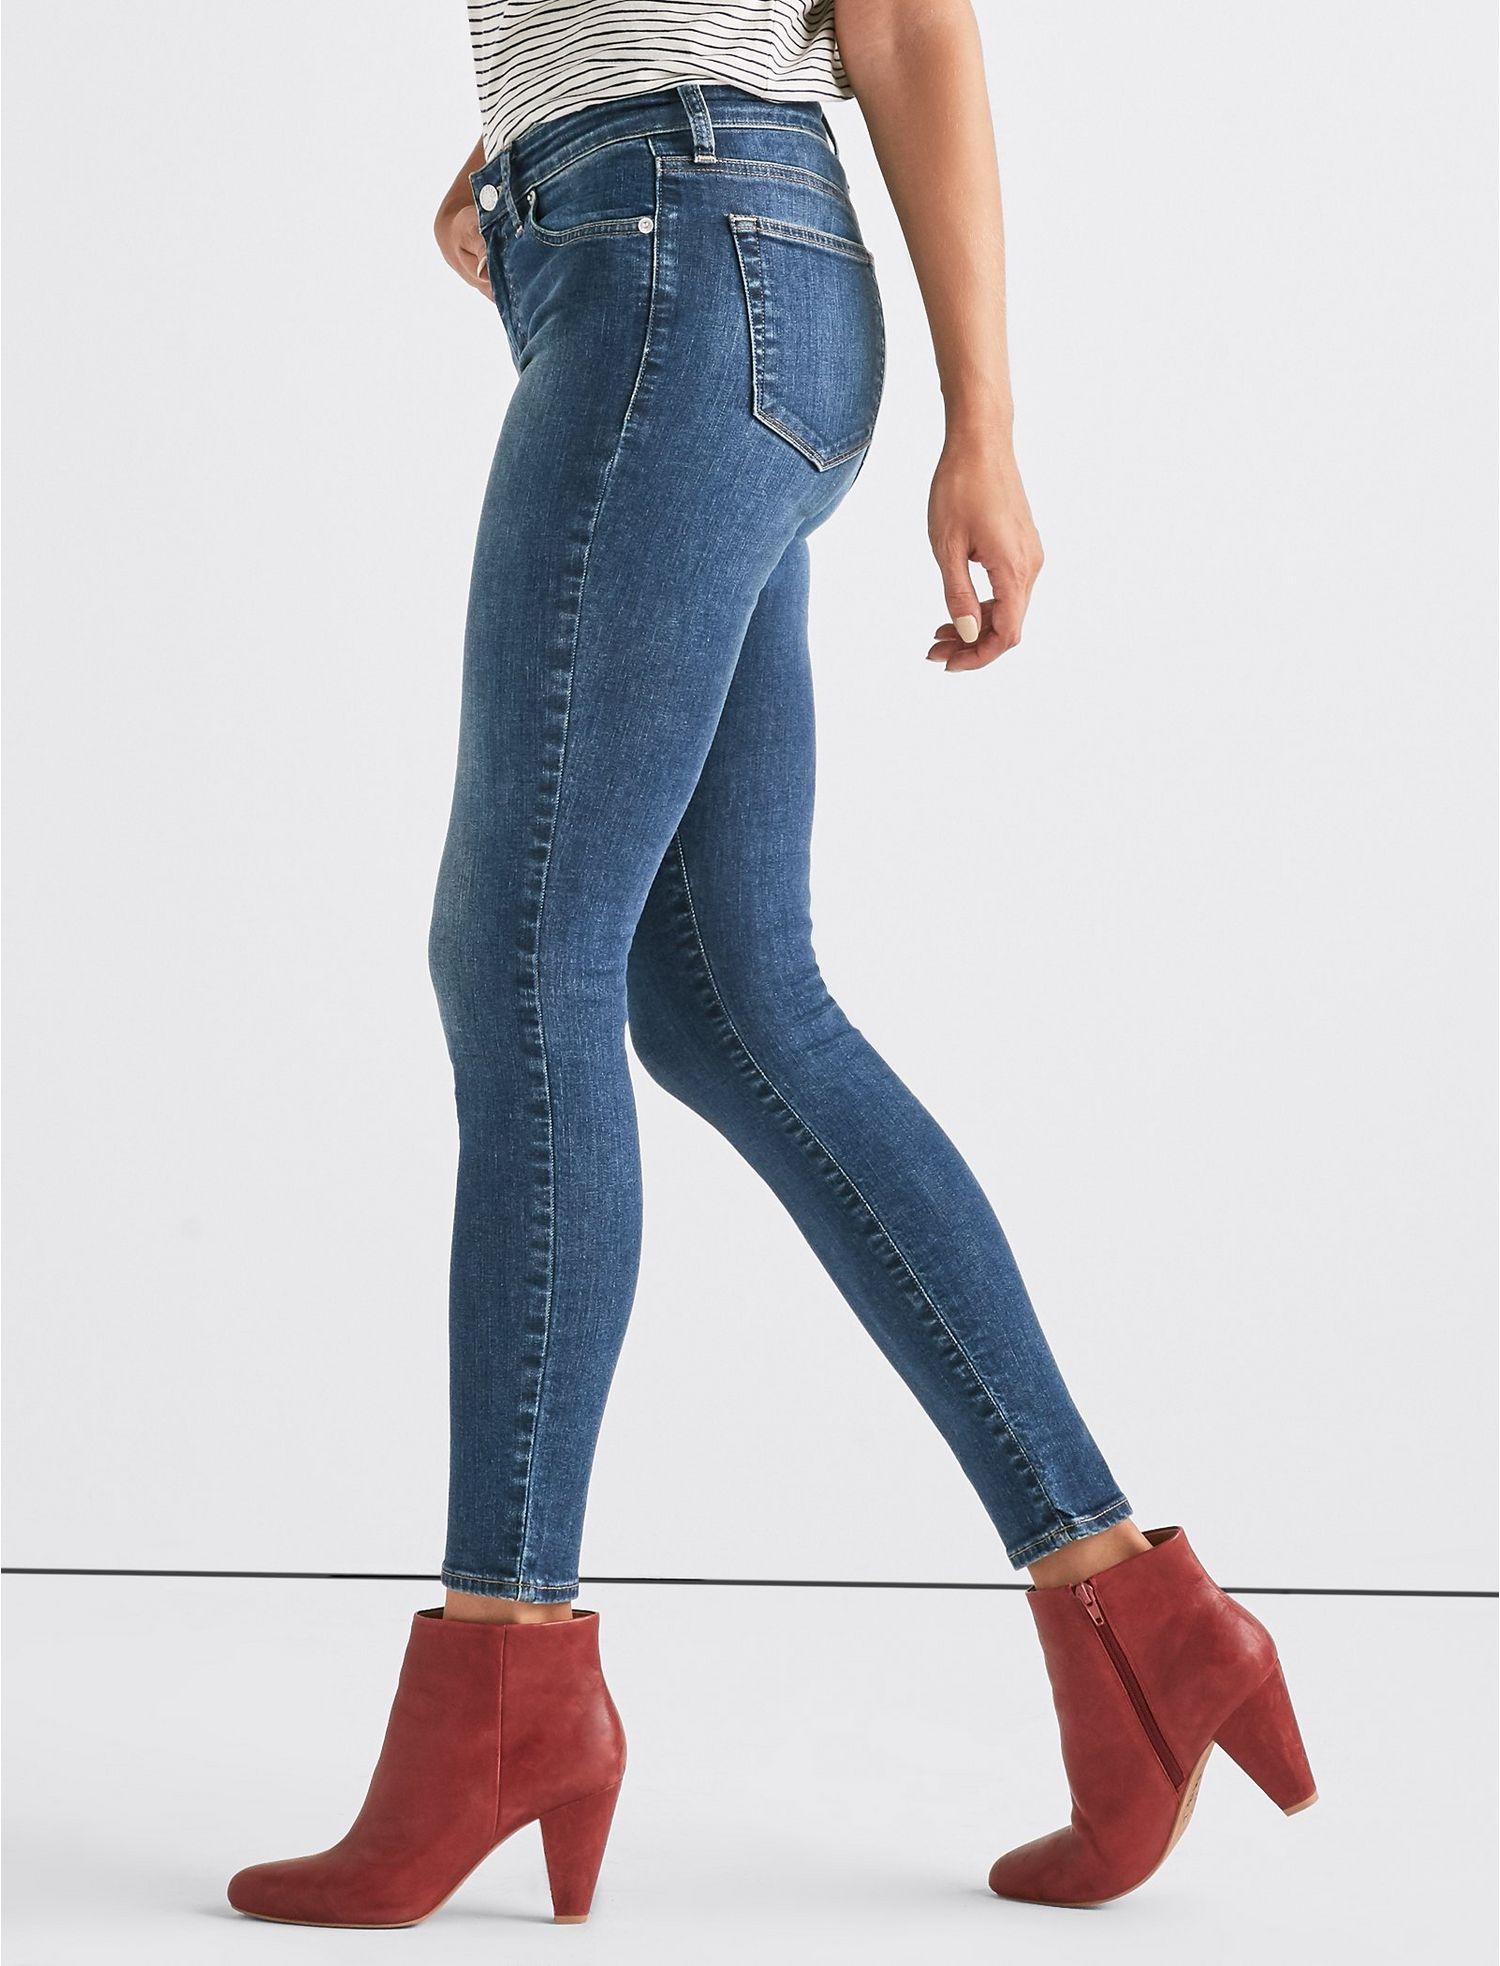 Lucky Brand Ava Mid Rise Super Skinny Jean in Blue - Lyst